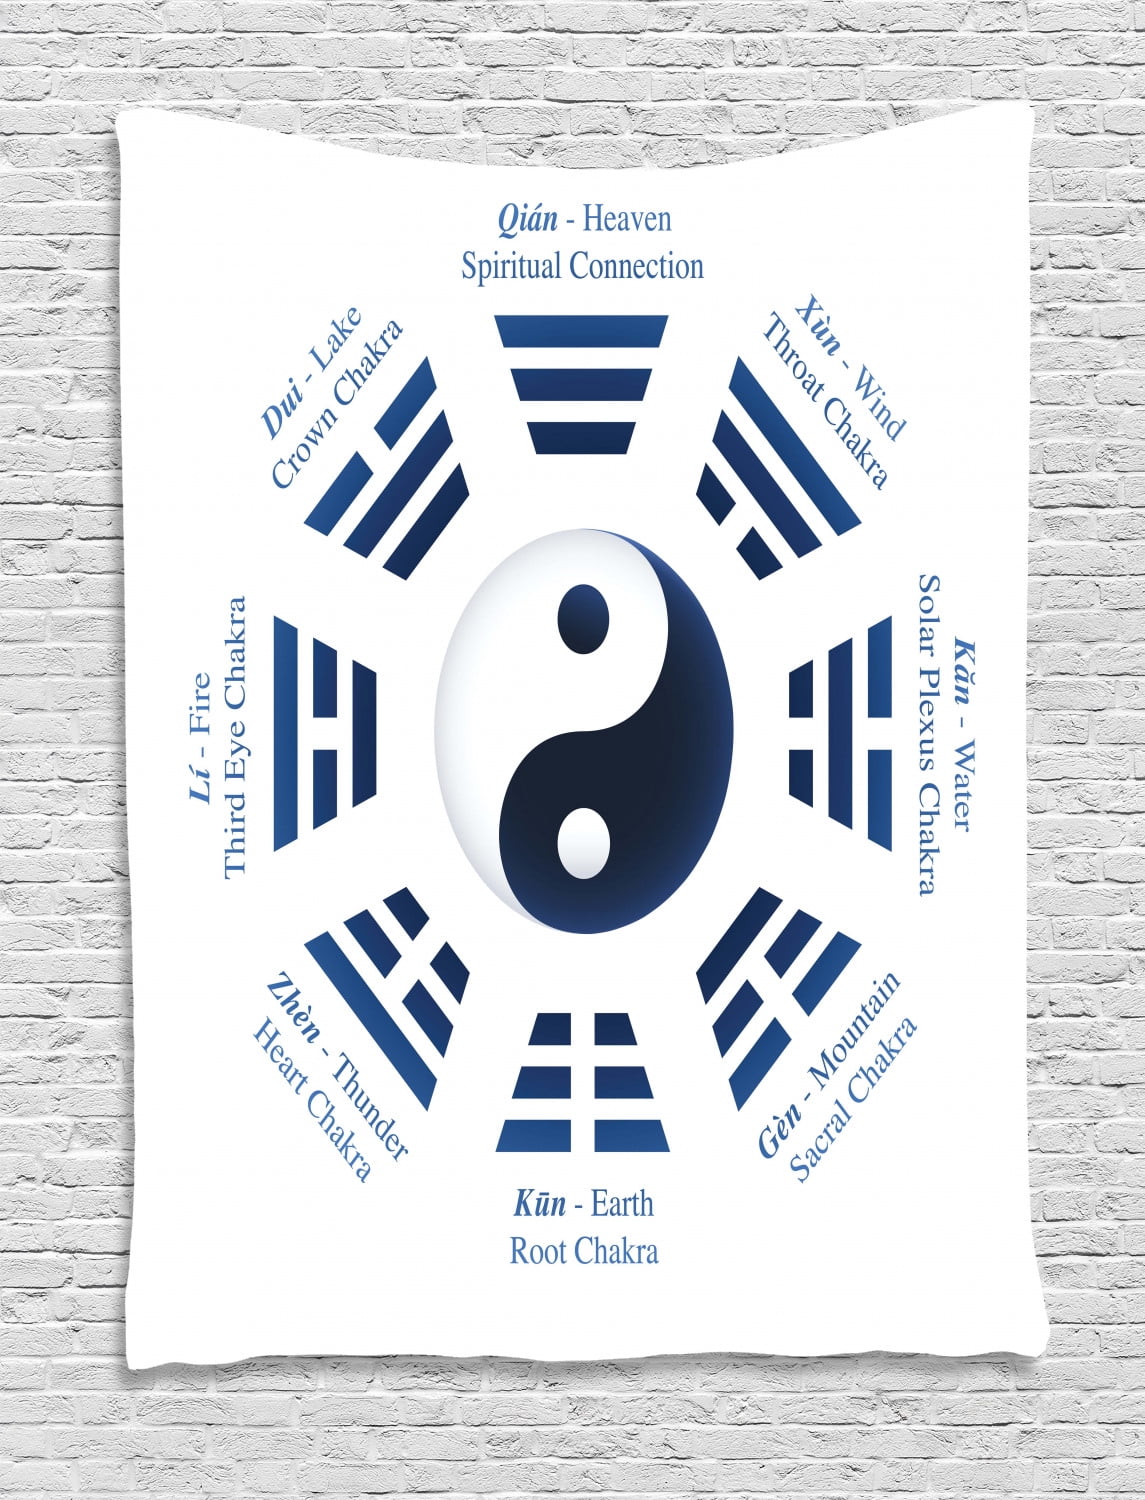 Yin Yang Tapestry, Yin Yang Symbol and Trigrams for I-Ching Philosophy